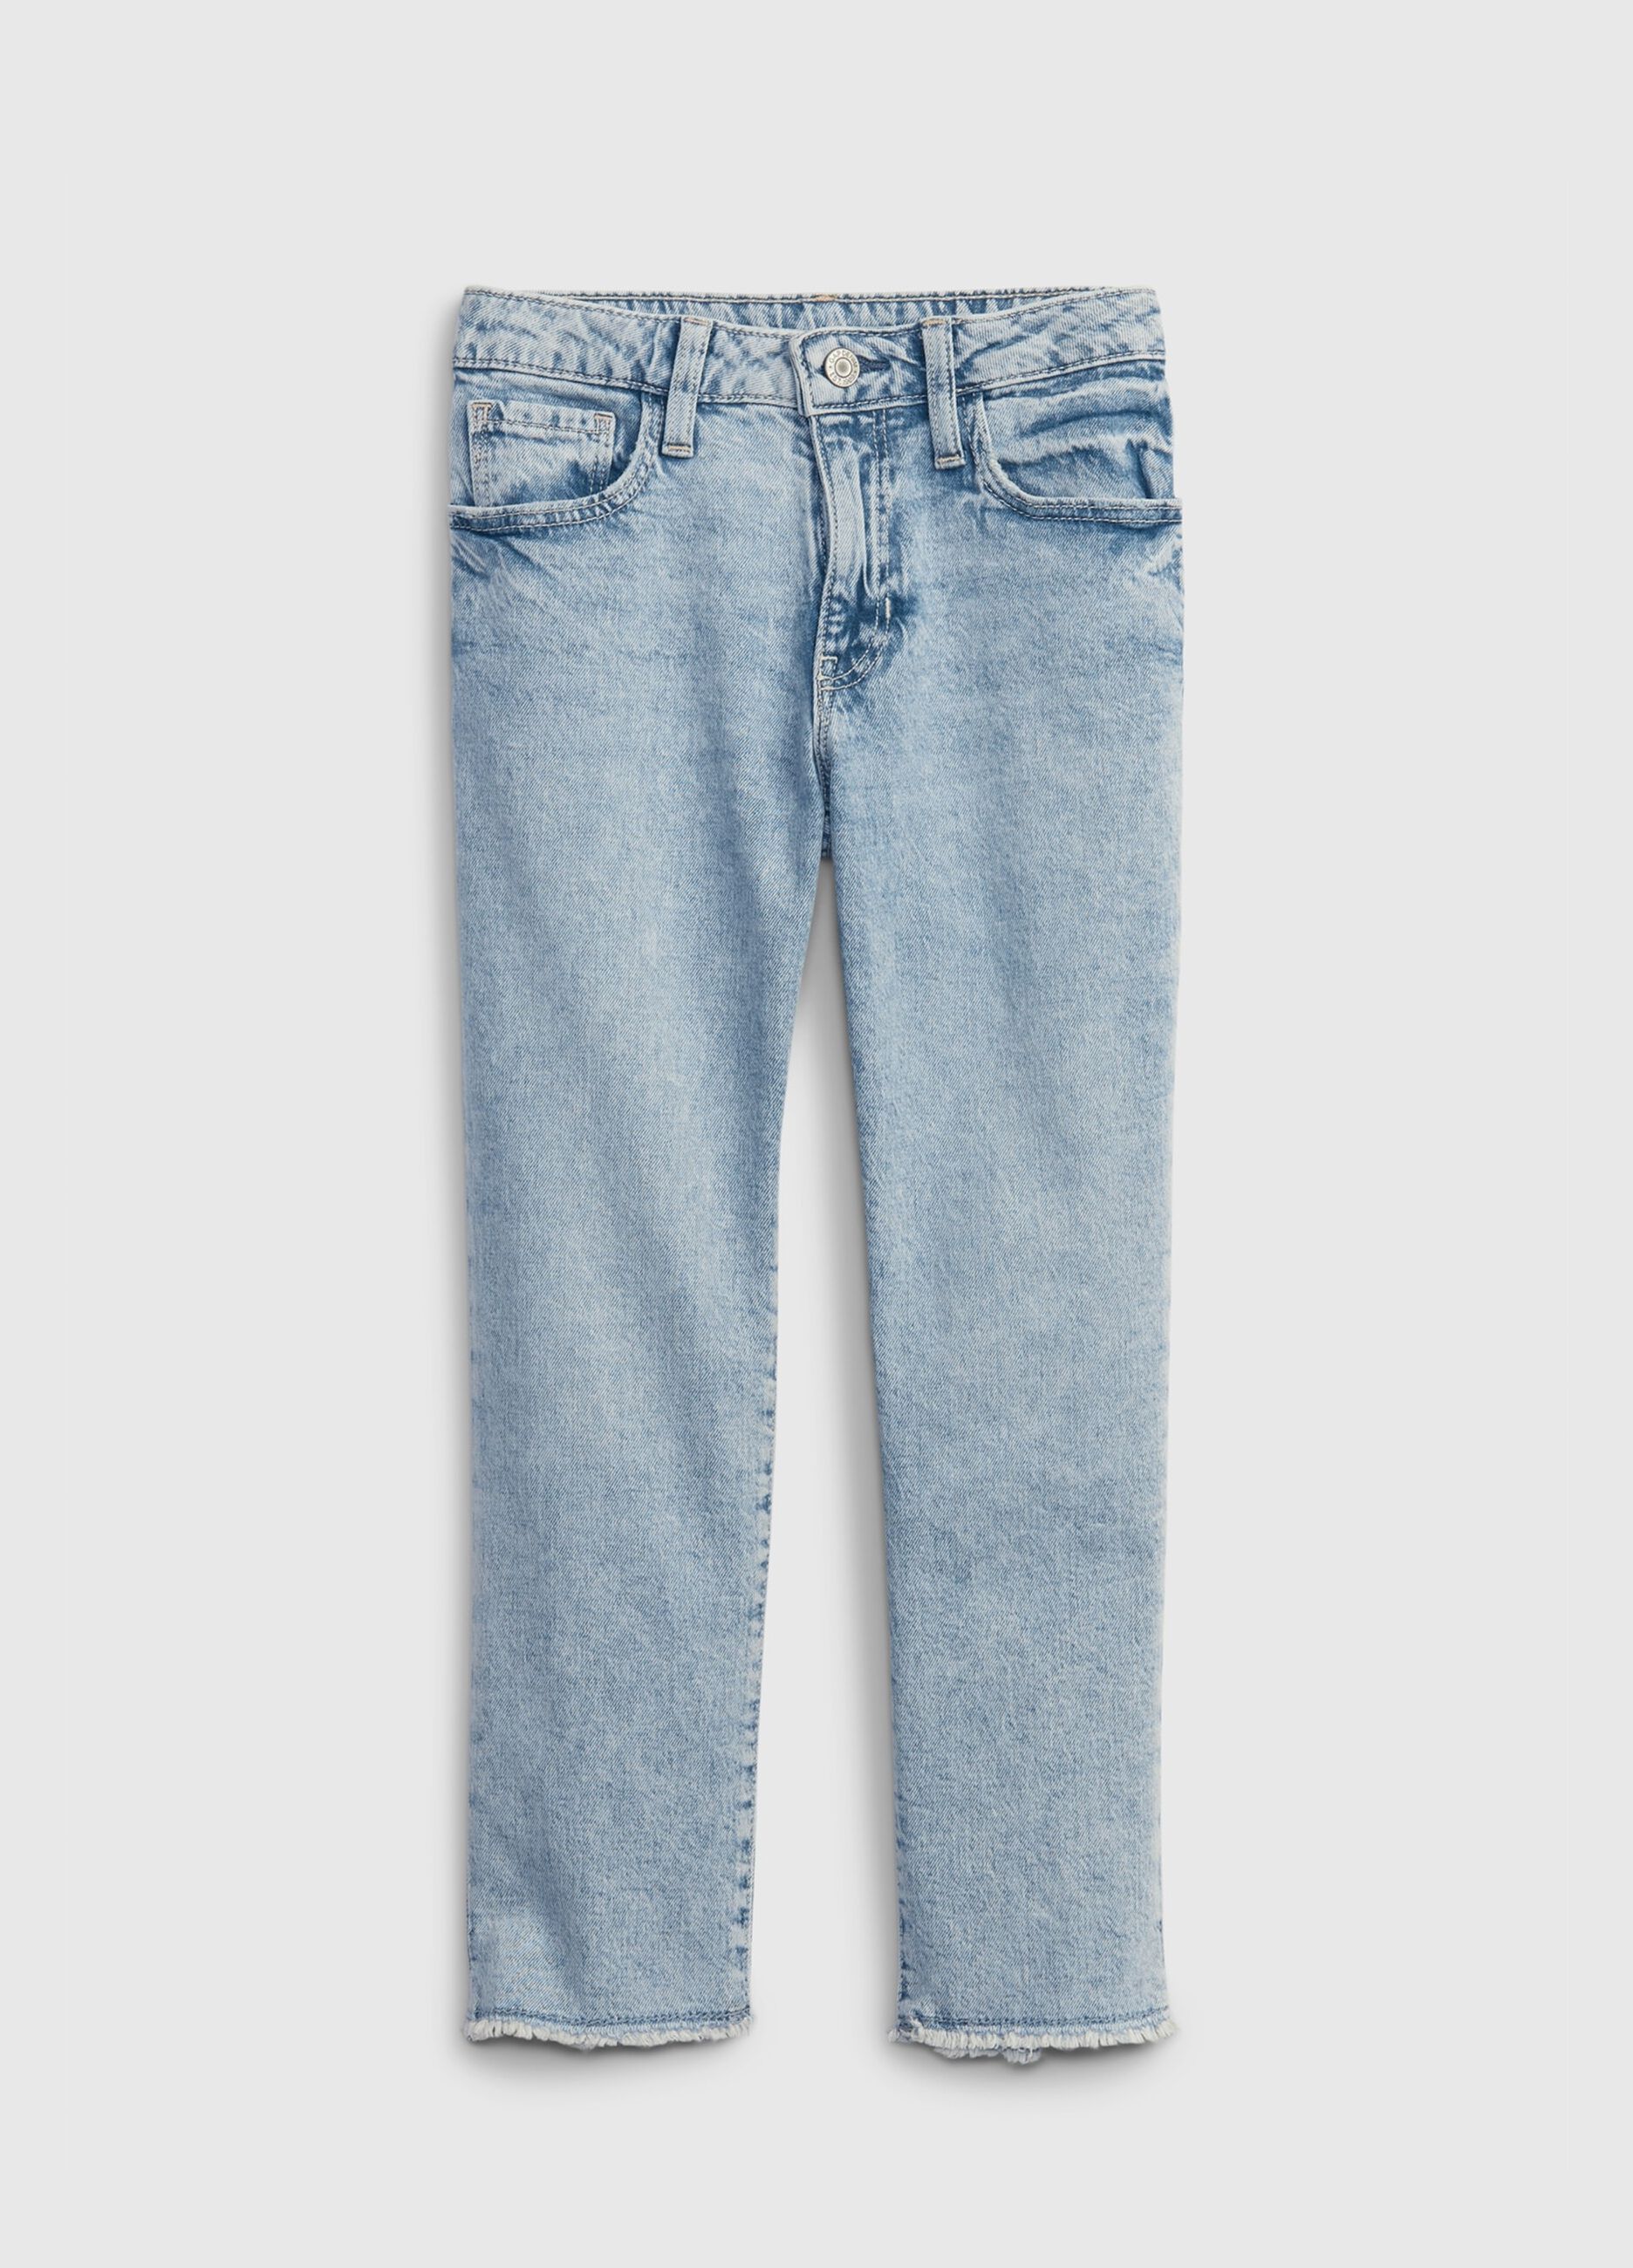 Girlfriend jeans with fringed hem